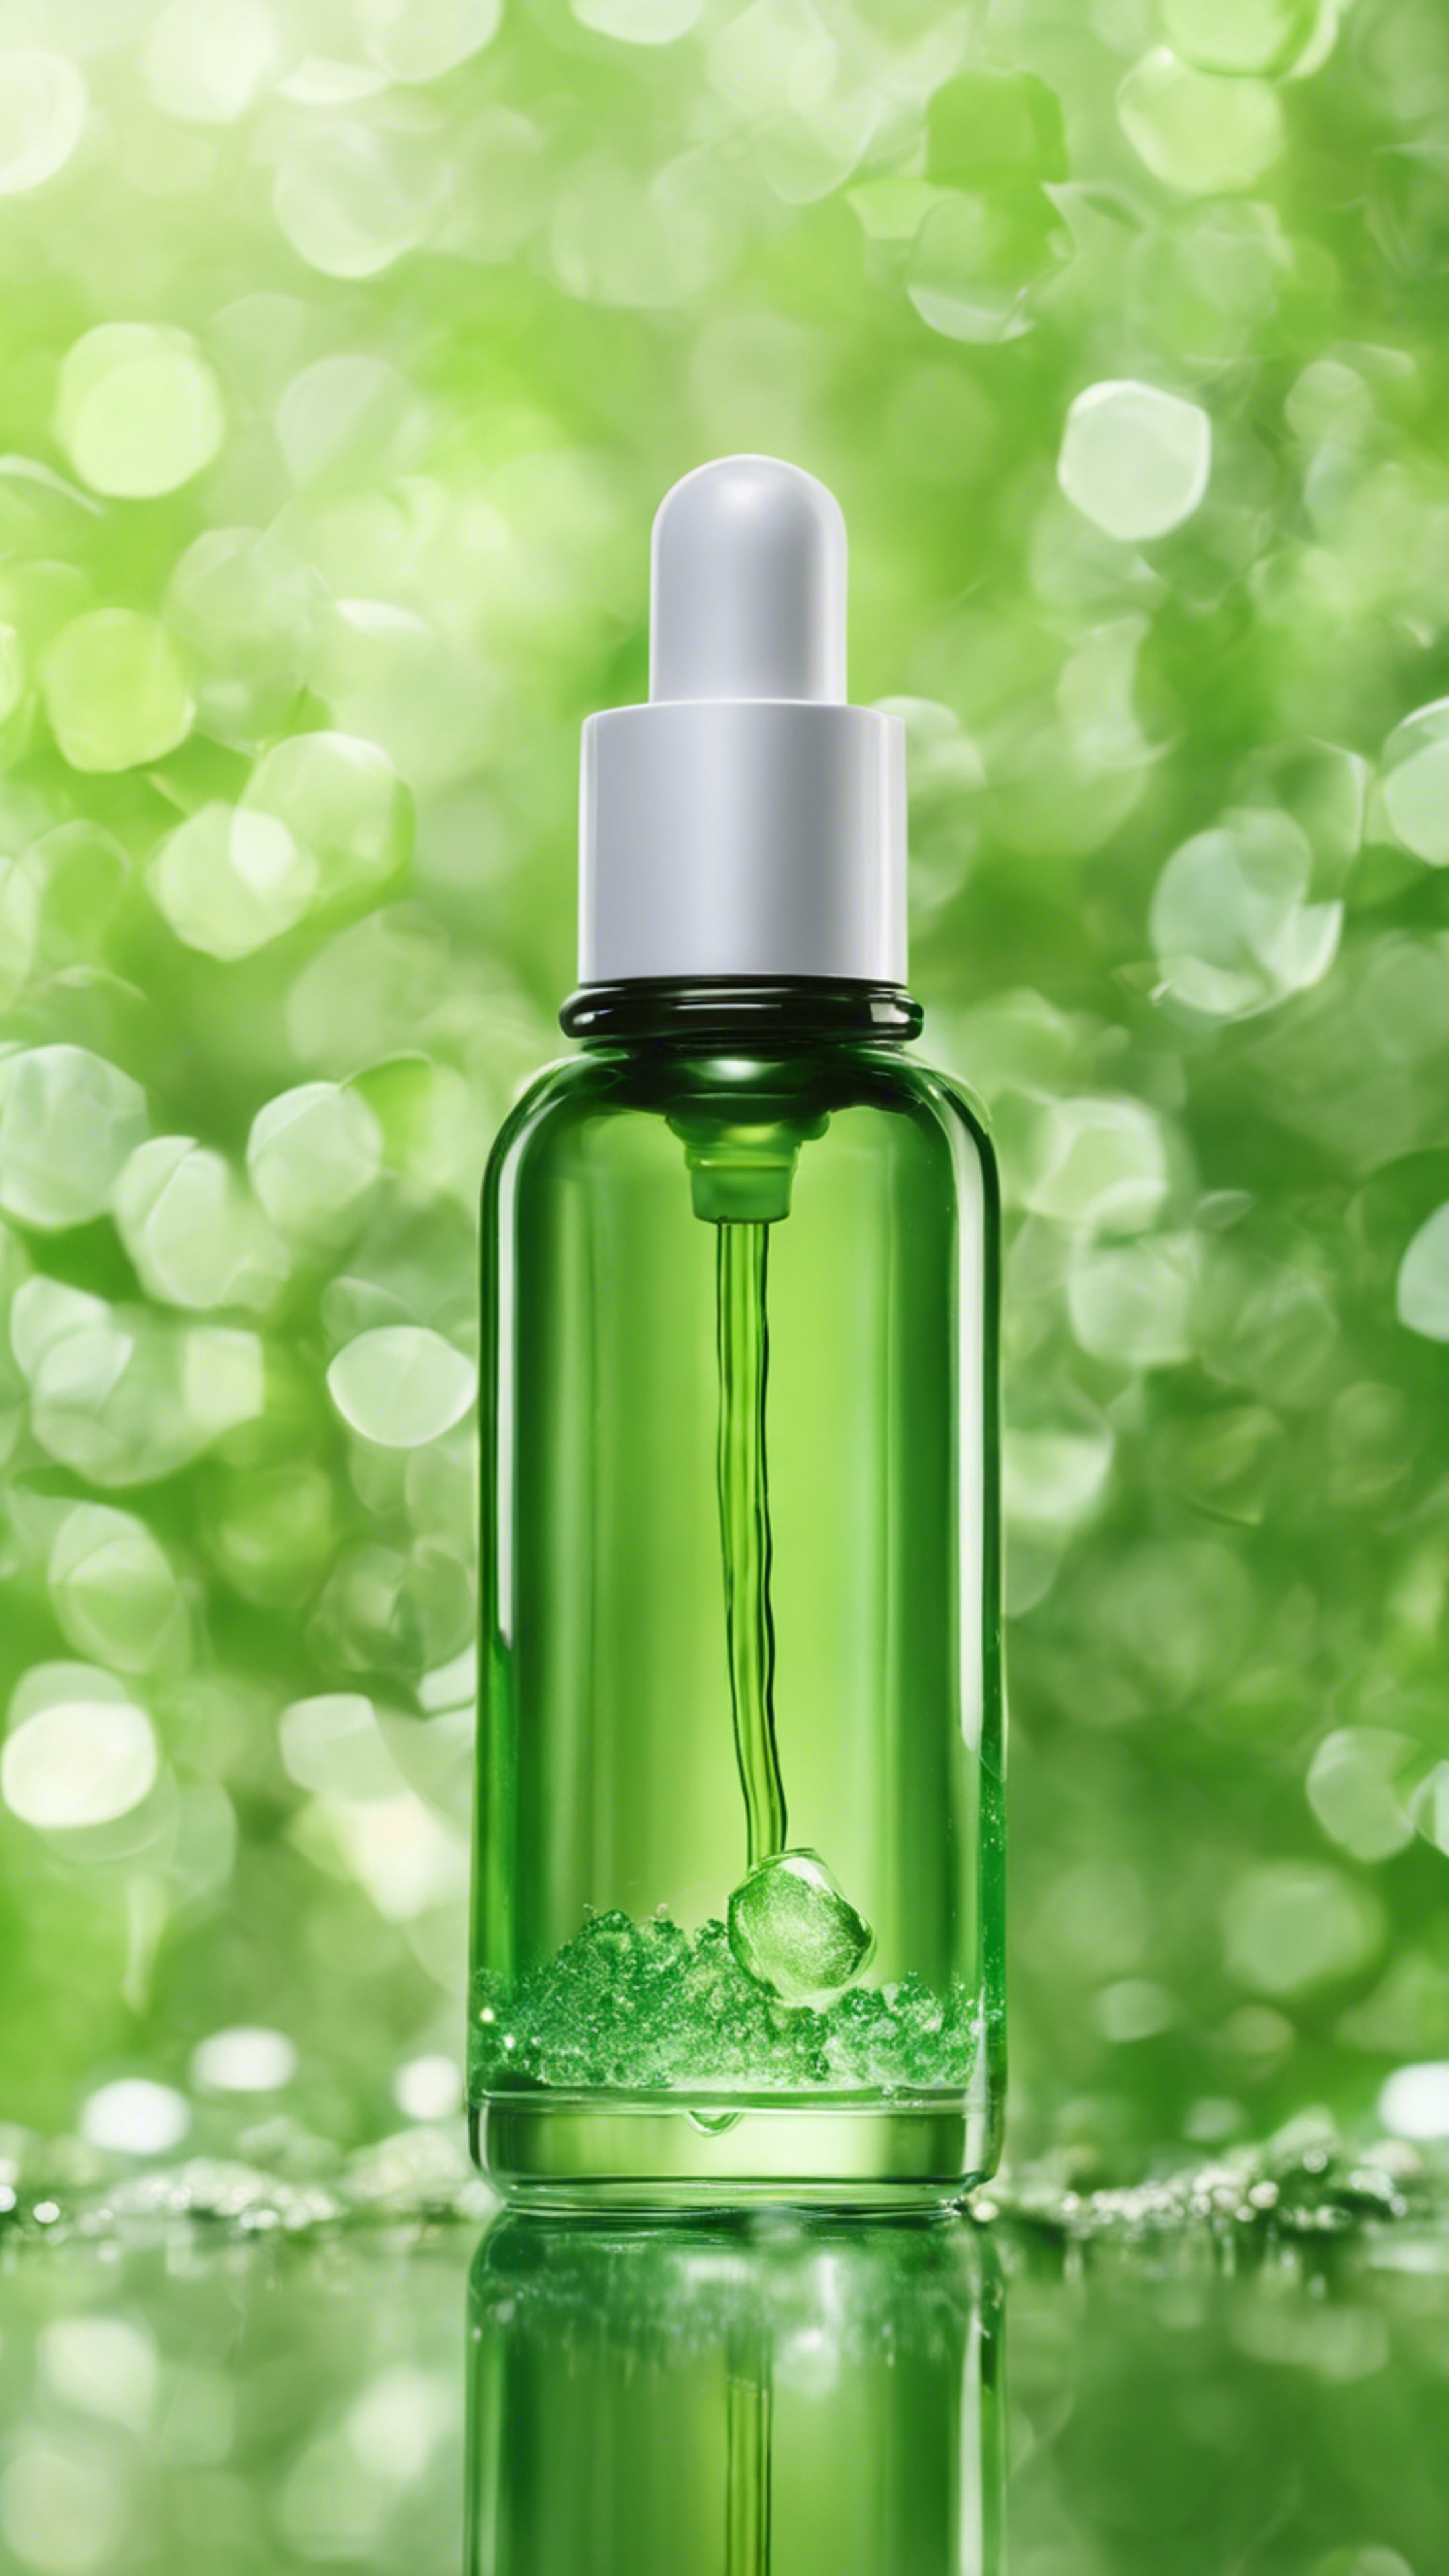 Green an eco-friendly cosmetics company's new hydrating face serum in a recyclable glass bottle. Wallpaper[04a9344189e843ad9259]